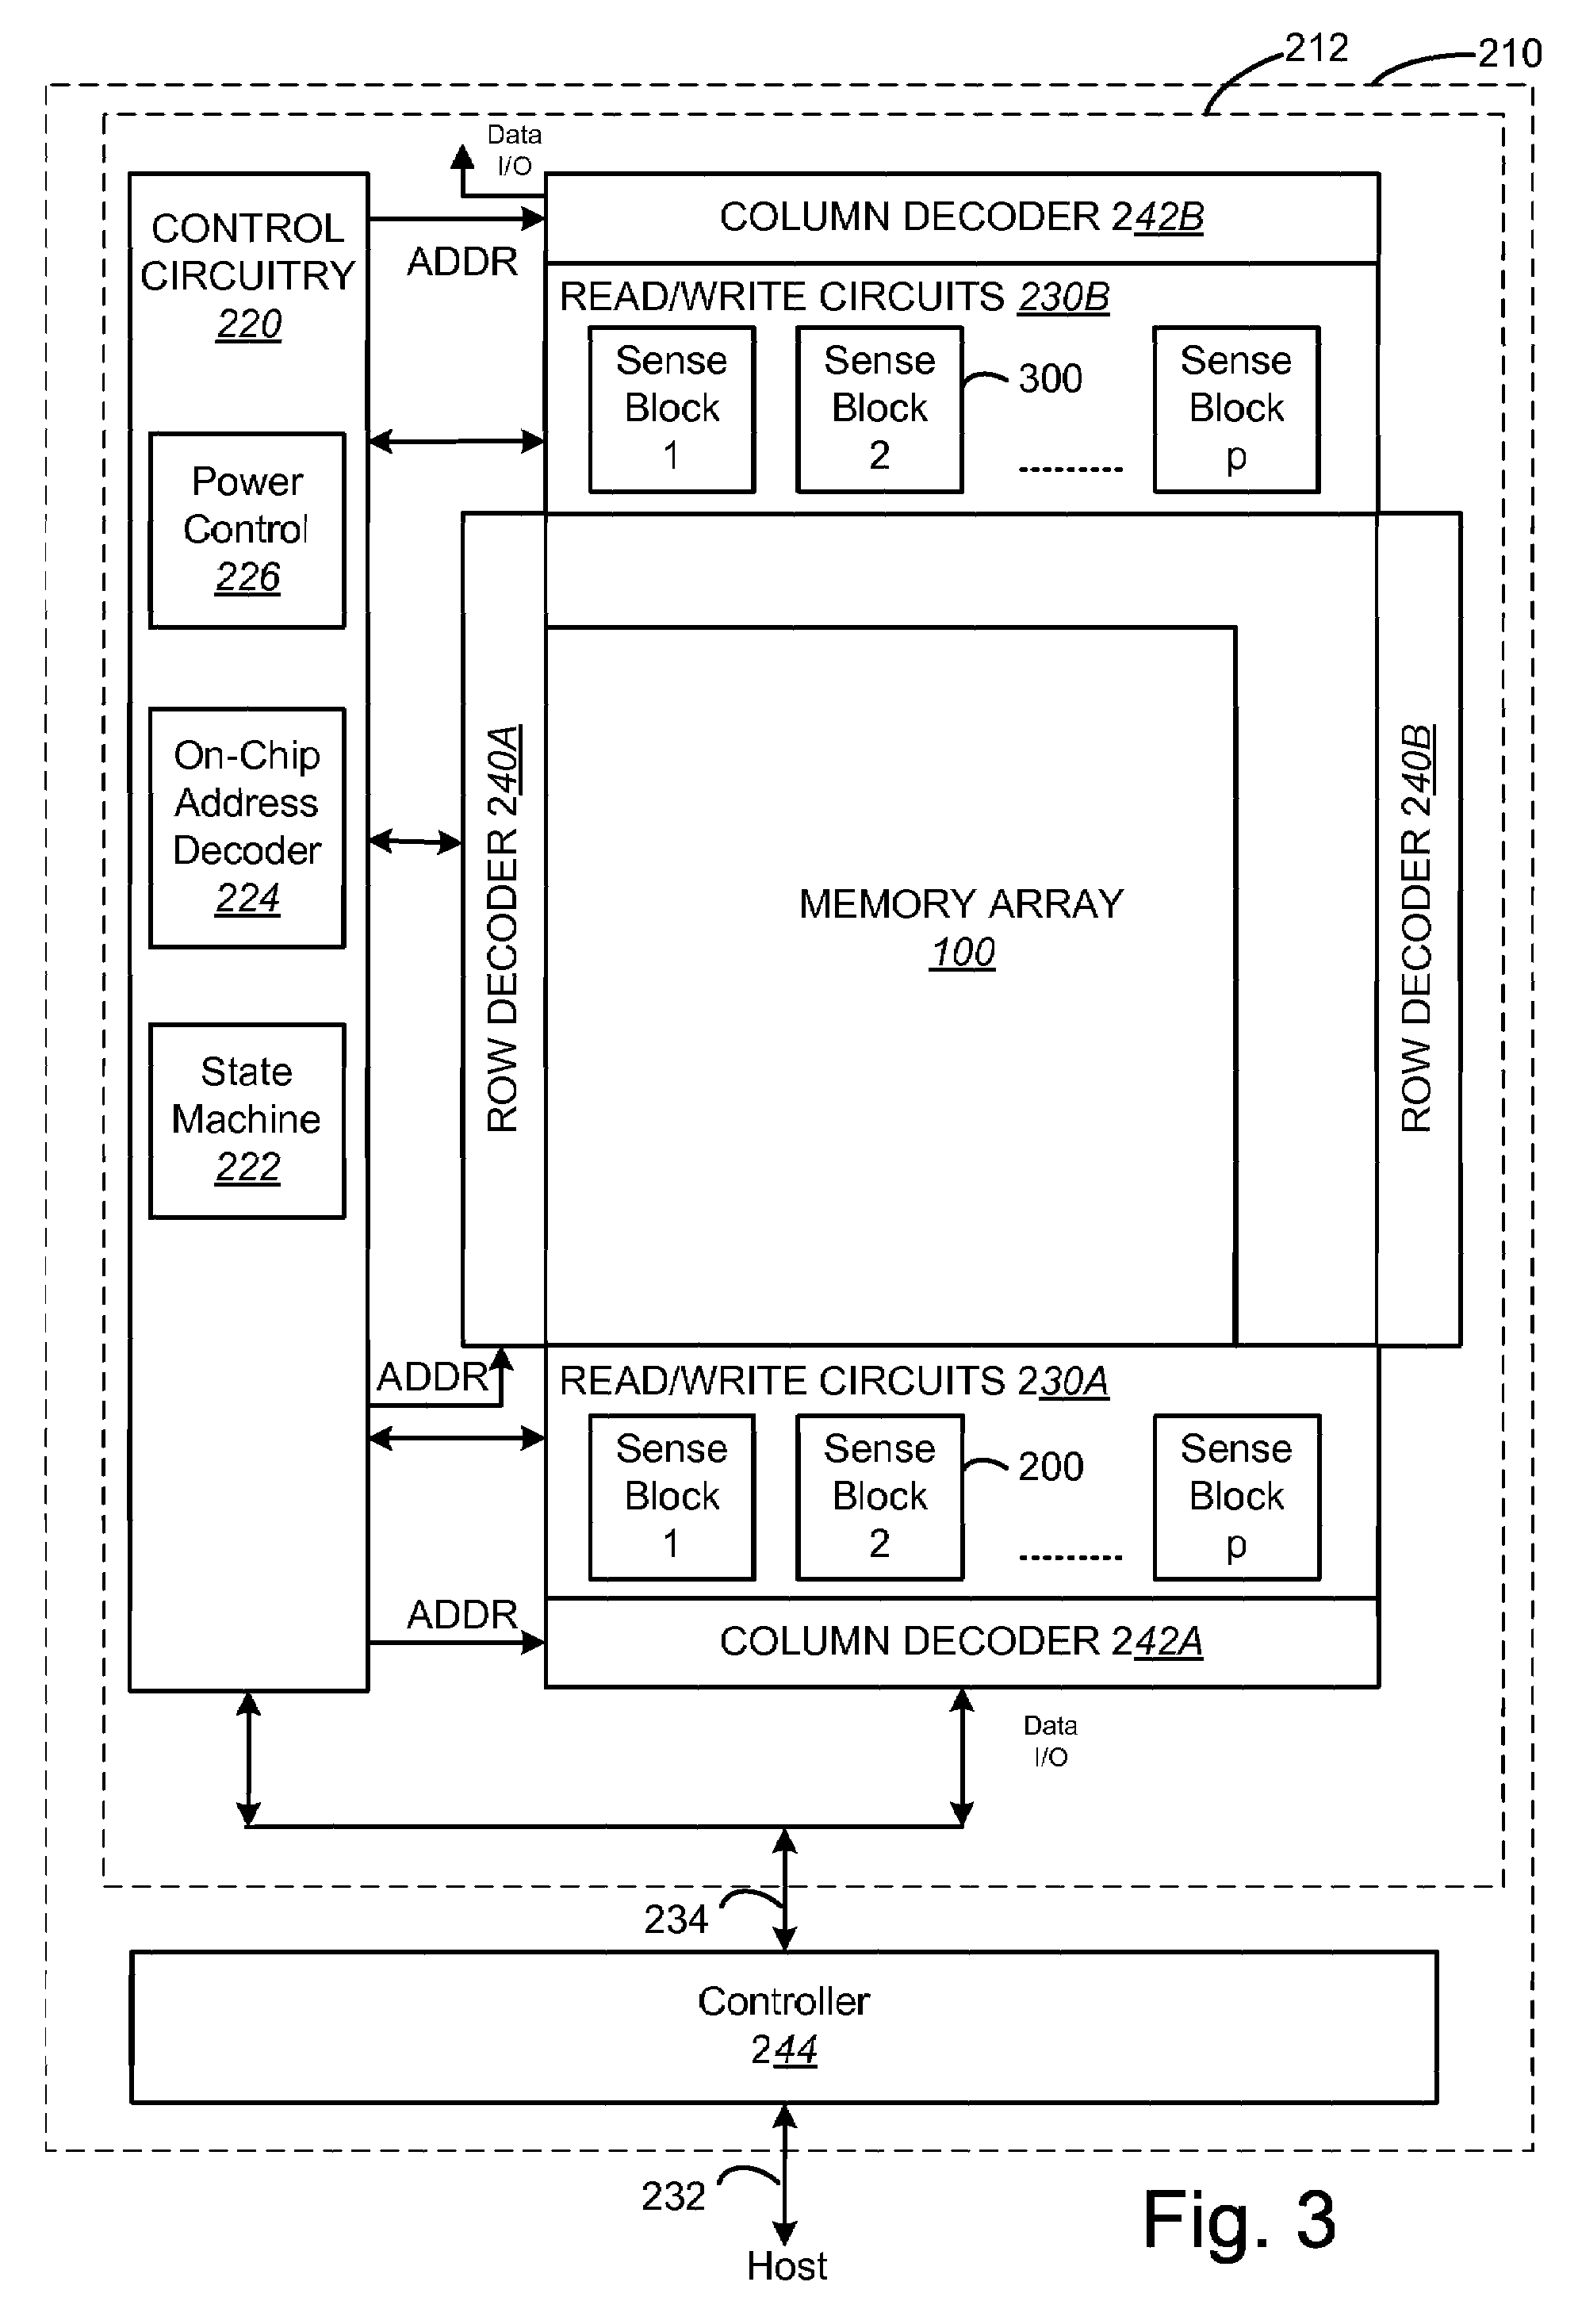 Apparatus with segmented bitscan for verification of programming